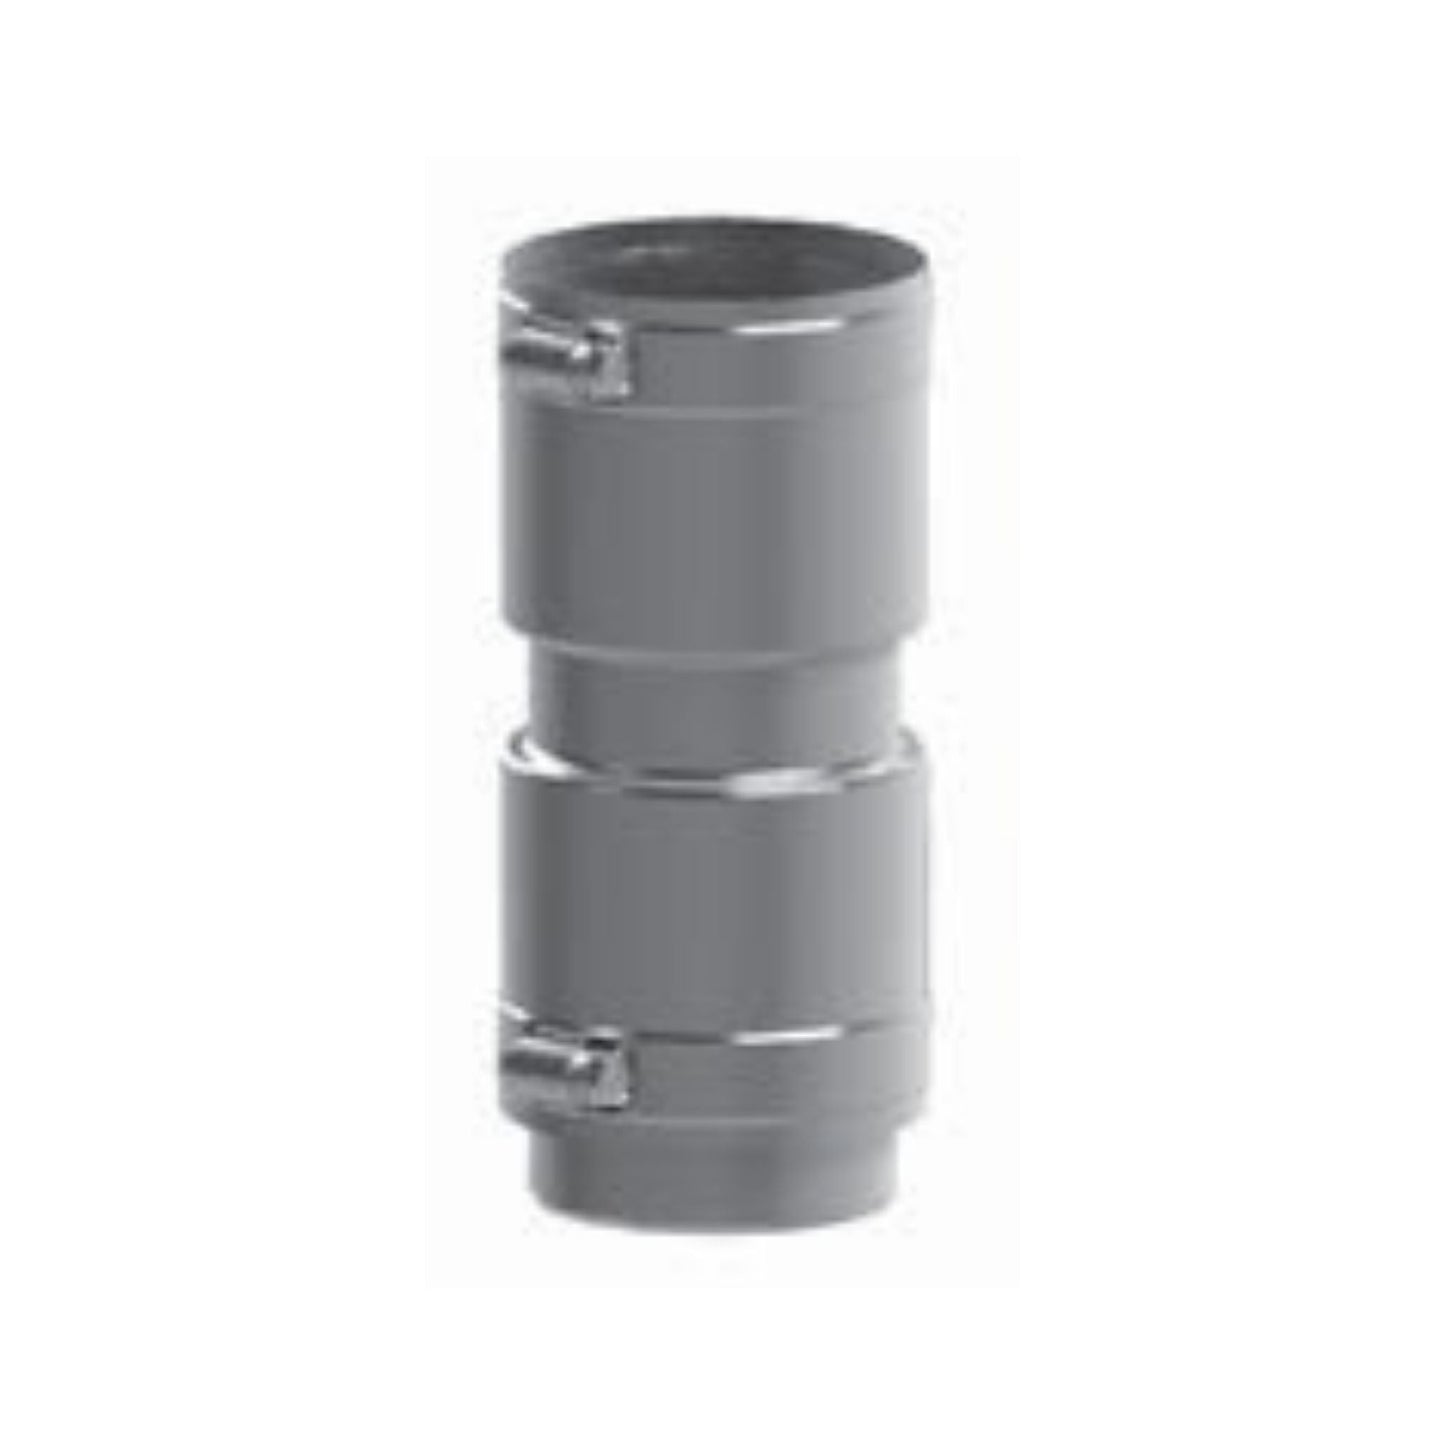 DuraVent FasNSeal Flex 8" 316L Stainless Steel Coupler